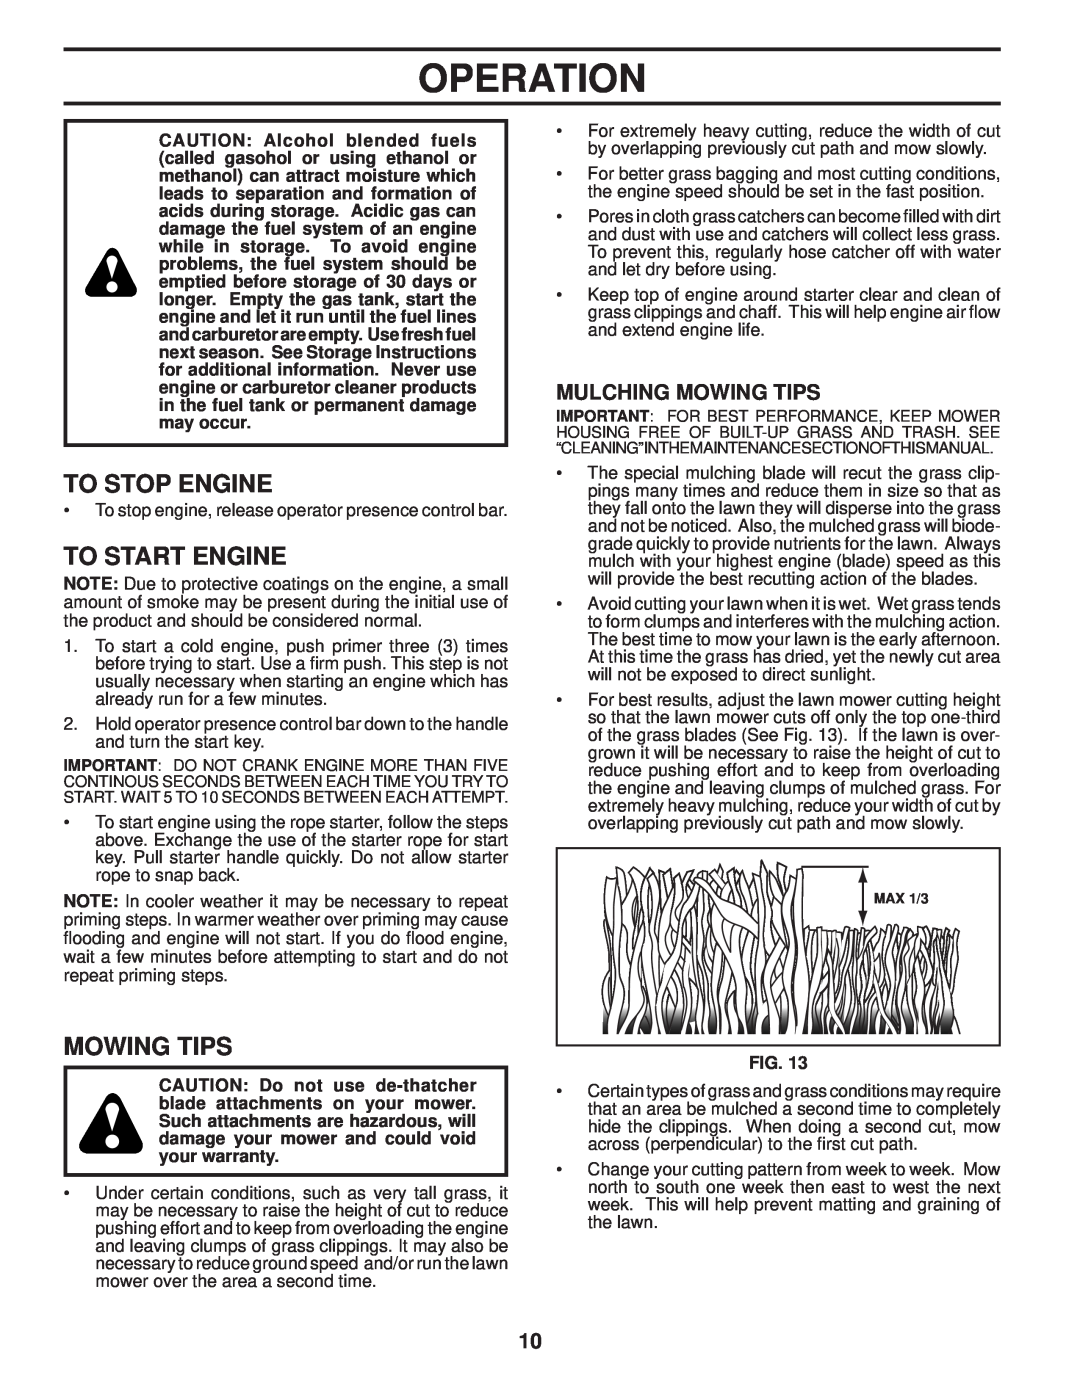 Husqvarna 87521HVE owner manual To Stop Engine, To Start Engine, Mulching Mowing Tips, Operation 